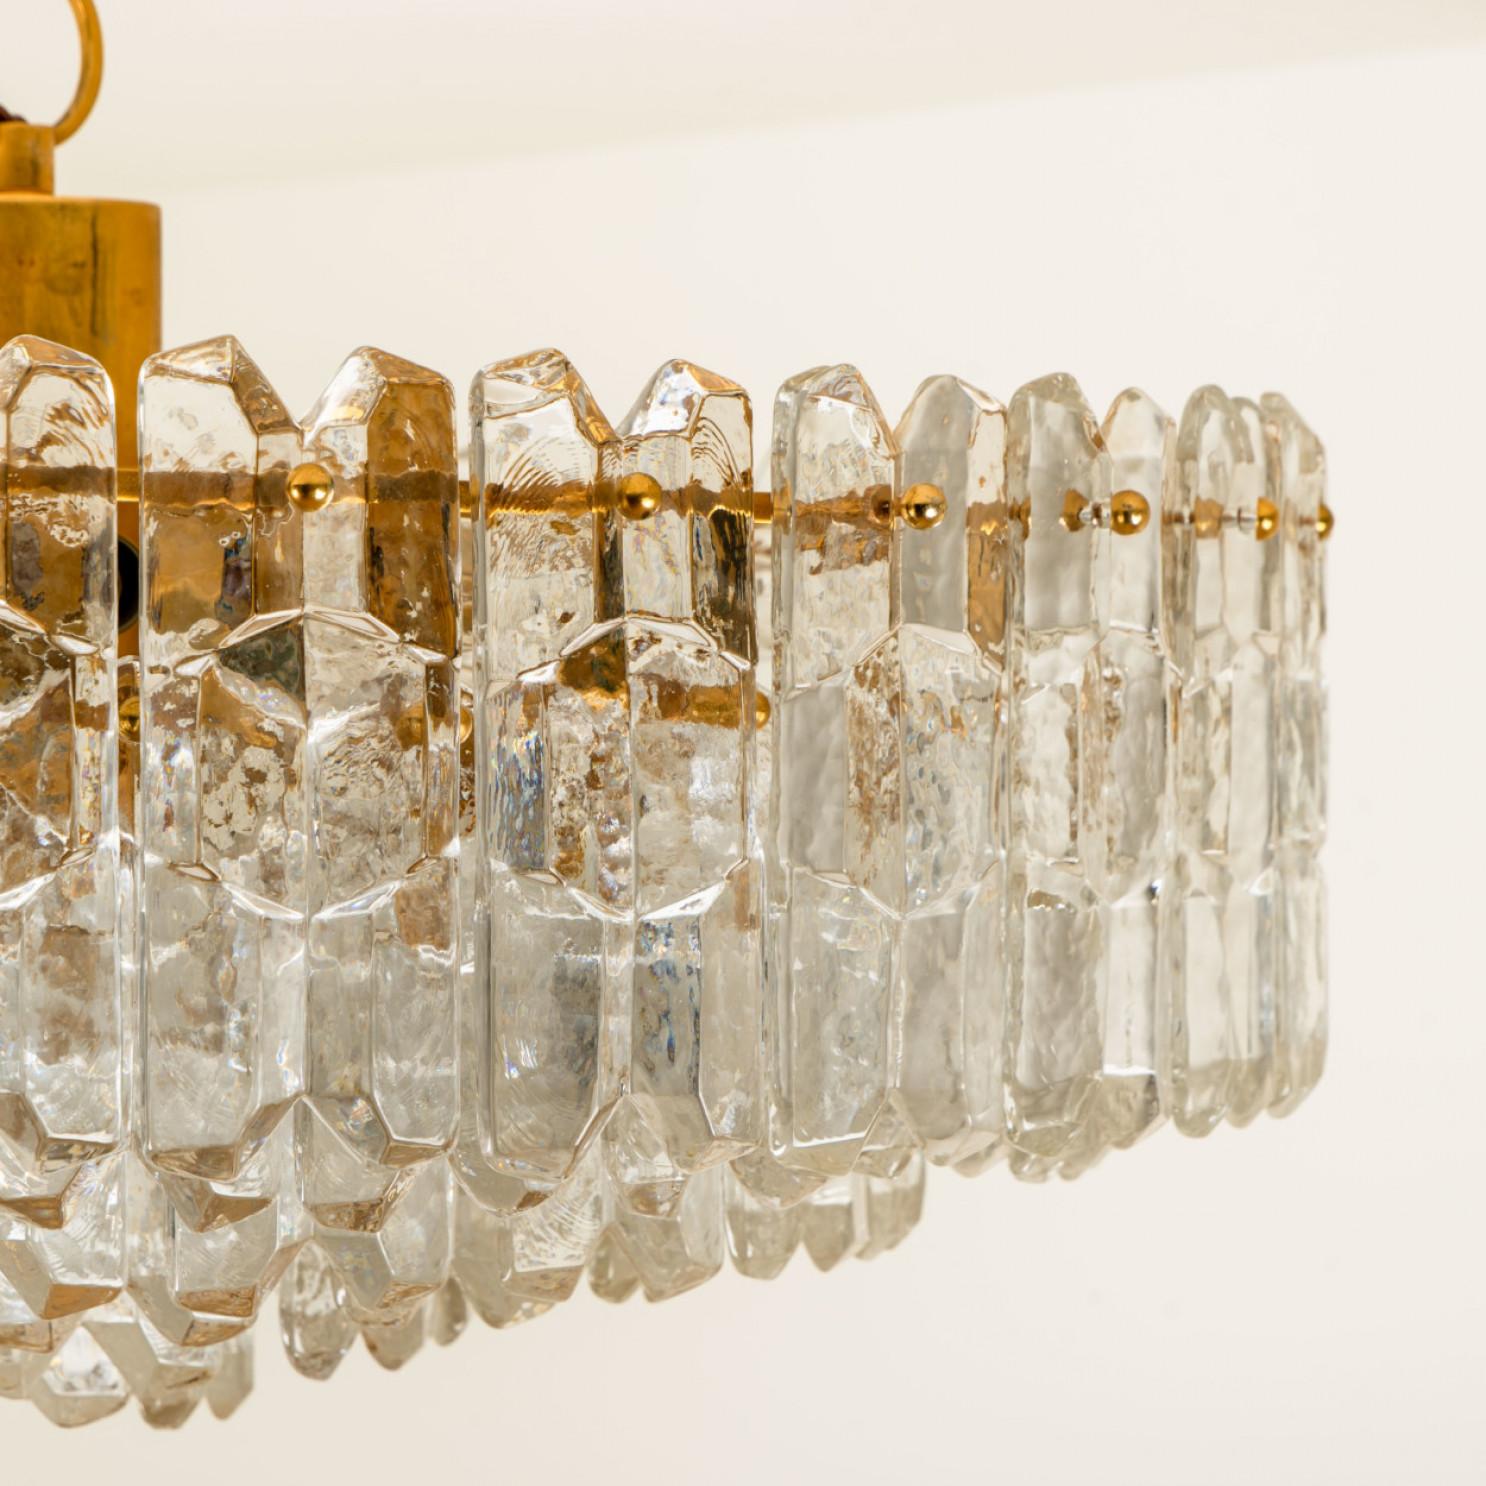 1 of the 2 Huge Kalmar Chandeliers 'Palazzo', Gilded Brass Glass, Austria, 1970s For Sale 11